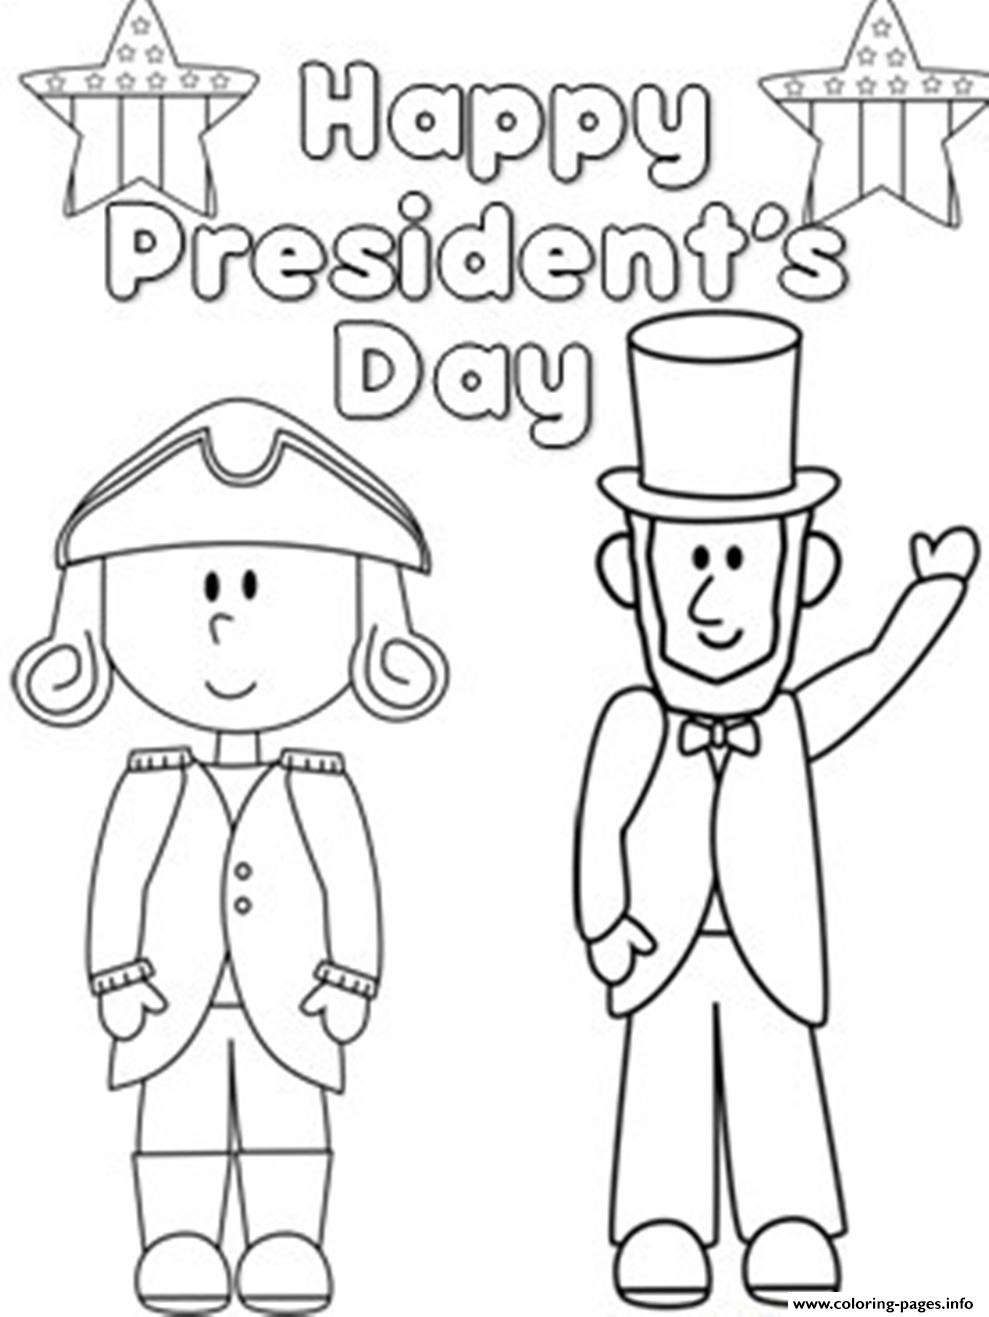 Happy Presidents Day coloring